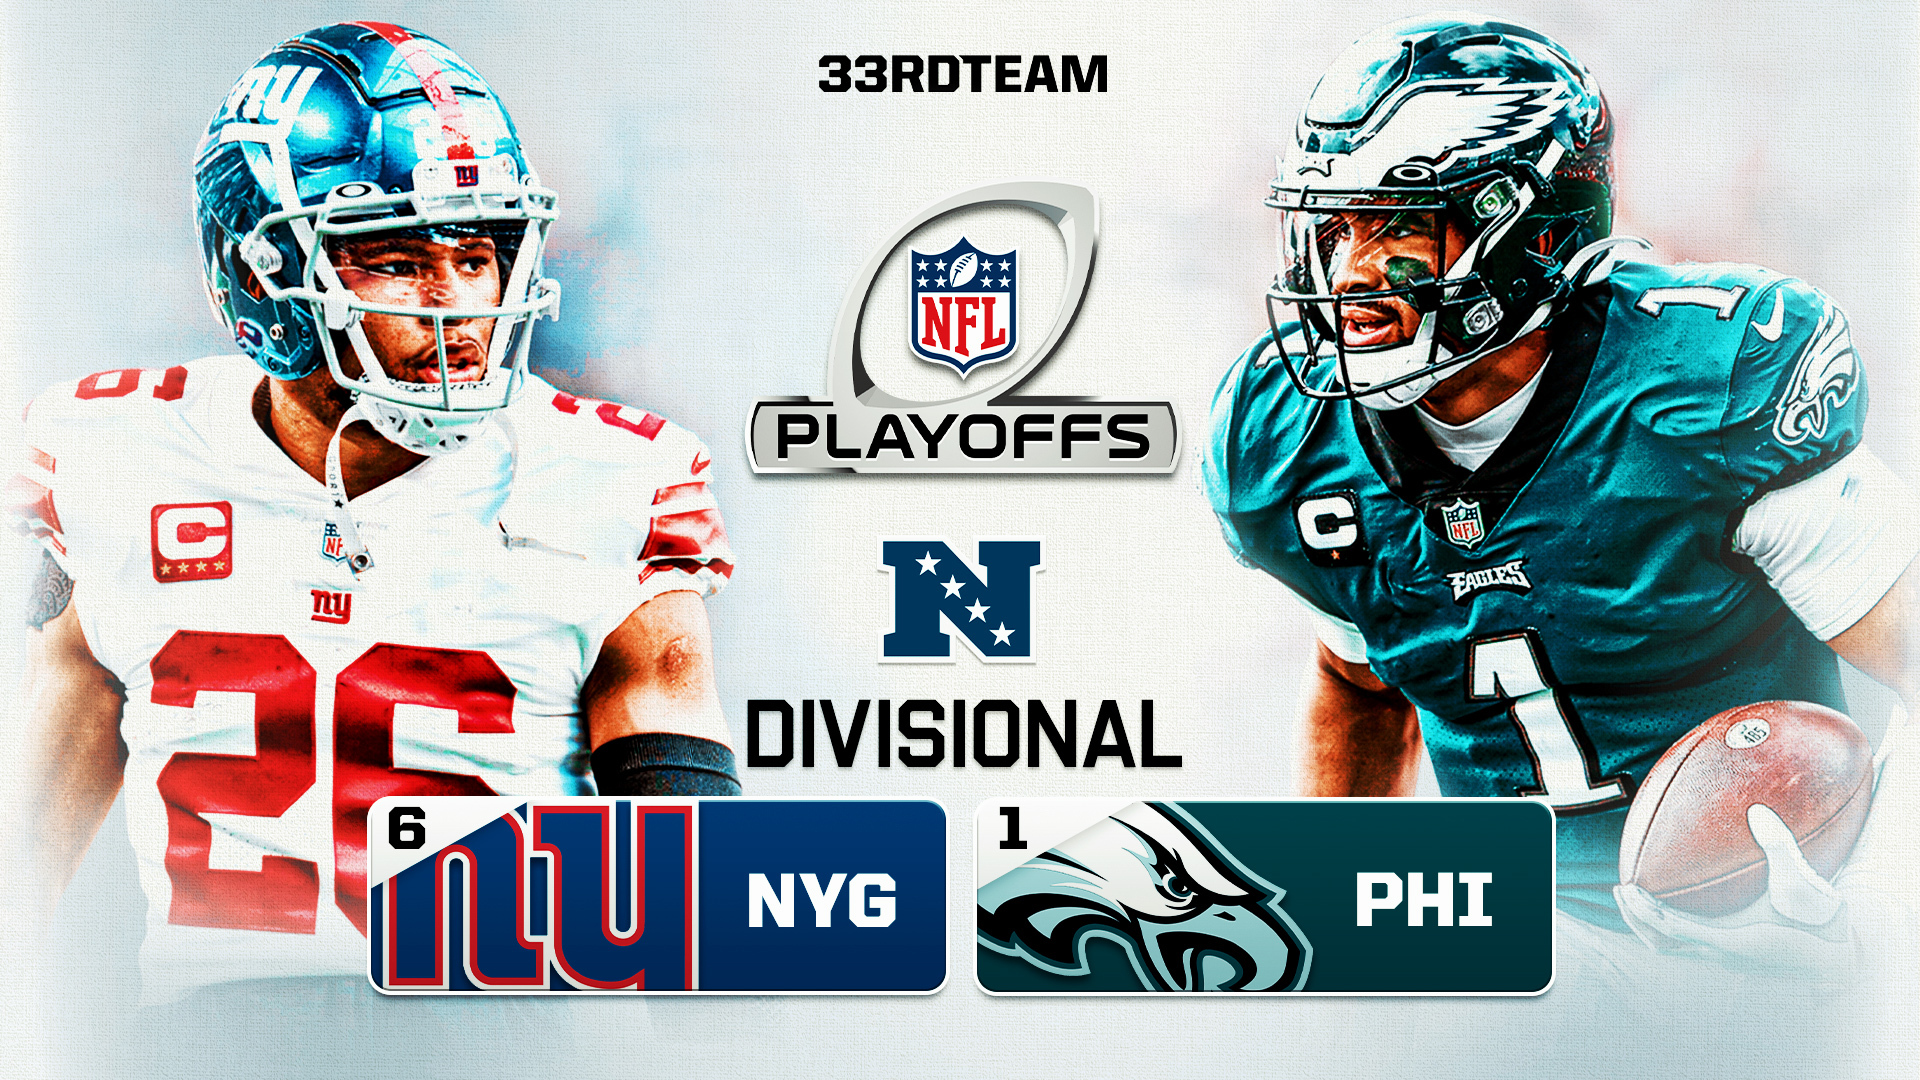 Divisional Game 2: Giants at Eagles